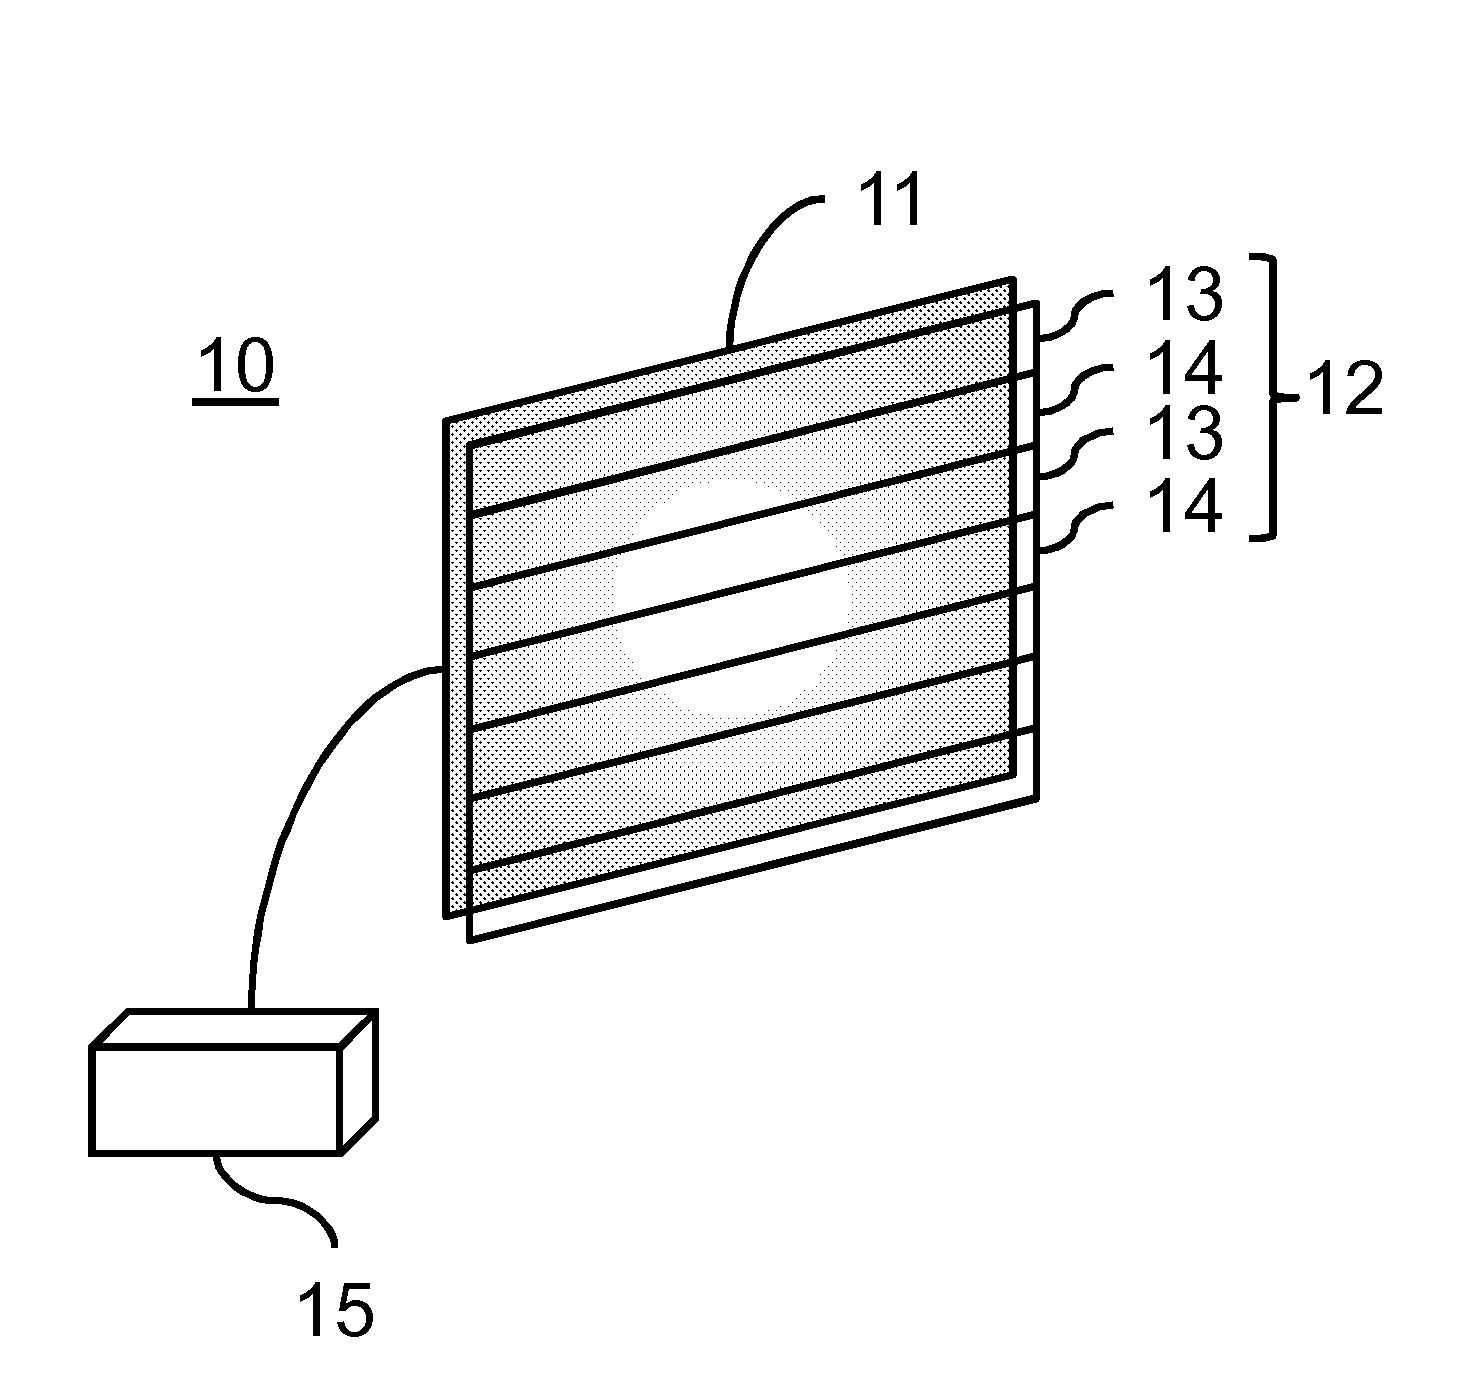 Stereoscopic display with improved vertical resolution